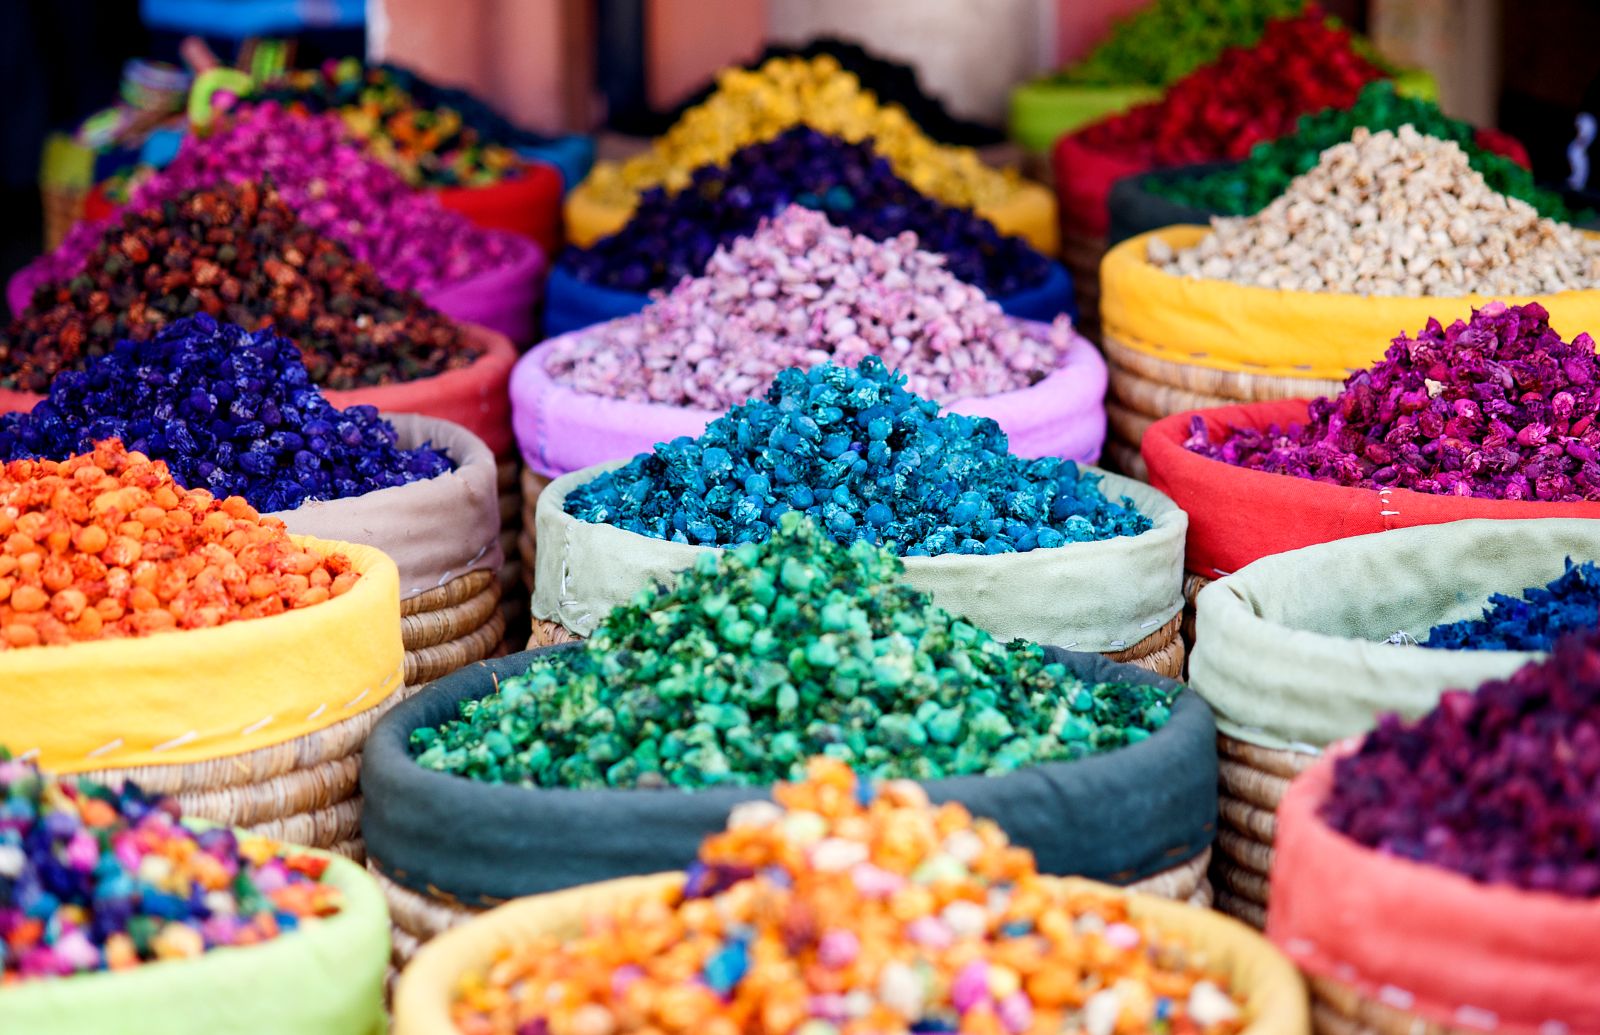 Colourful herbs and petals in a Marrakech market